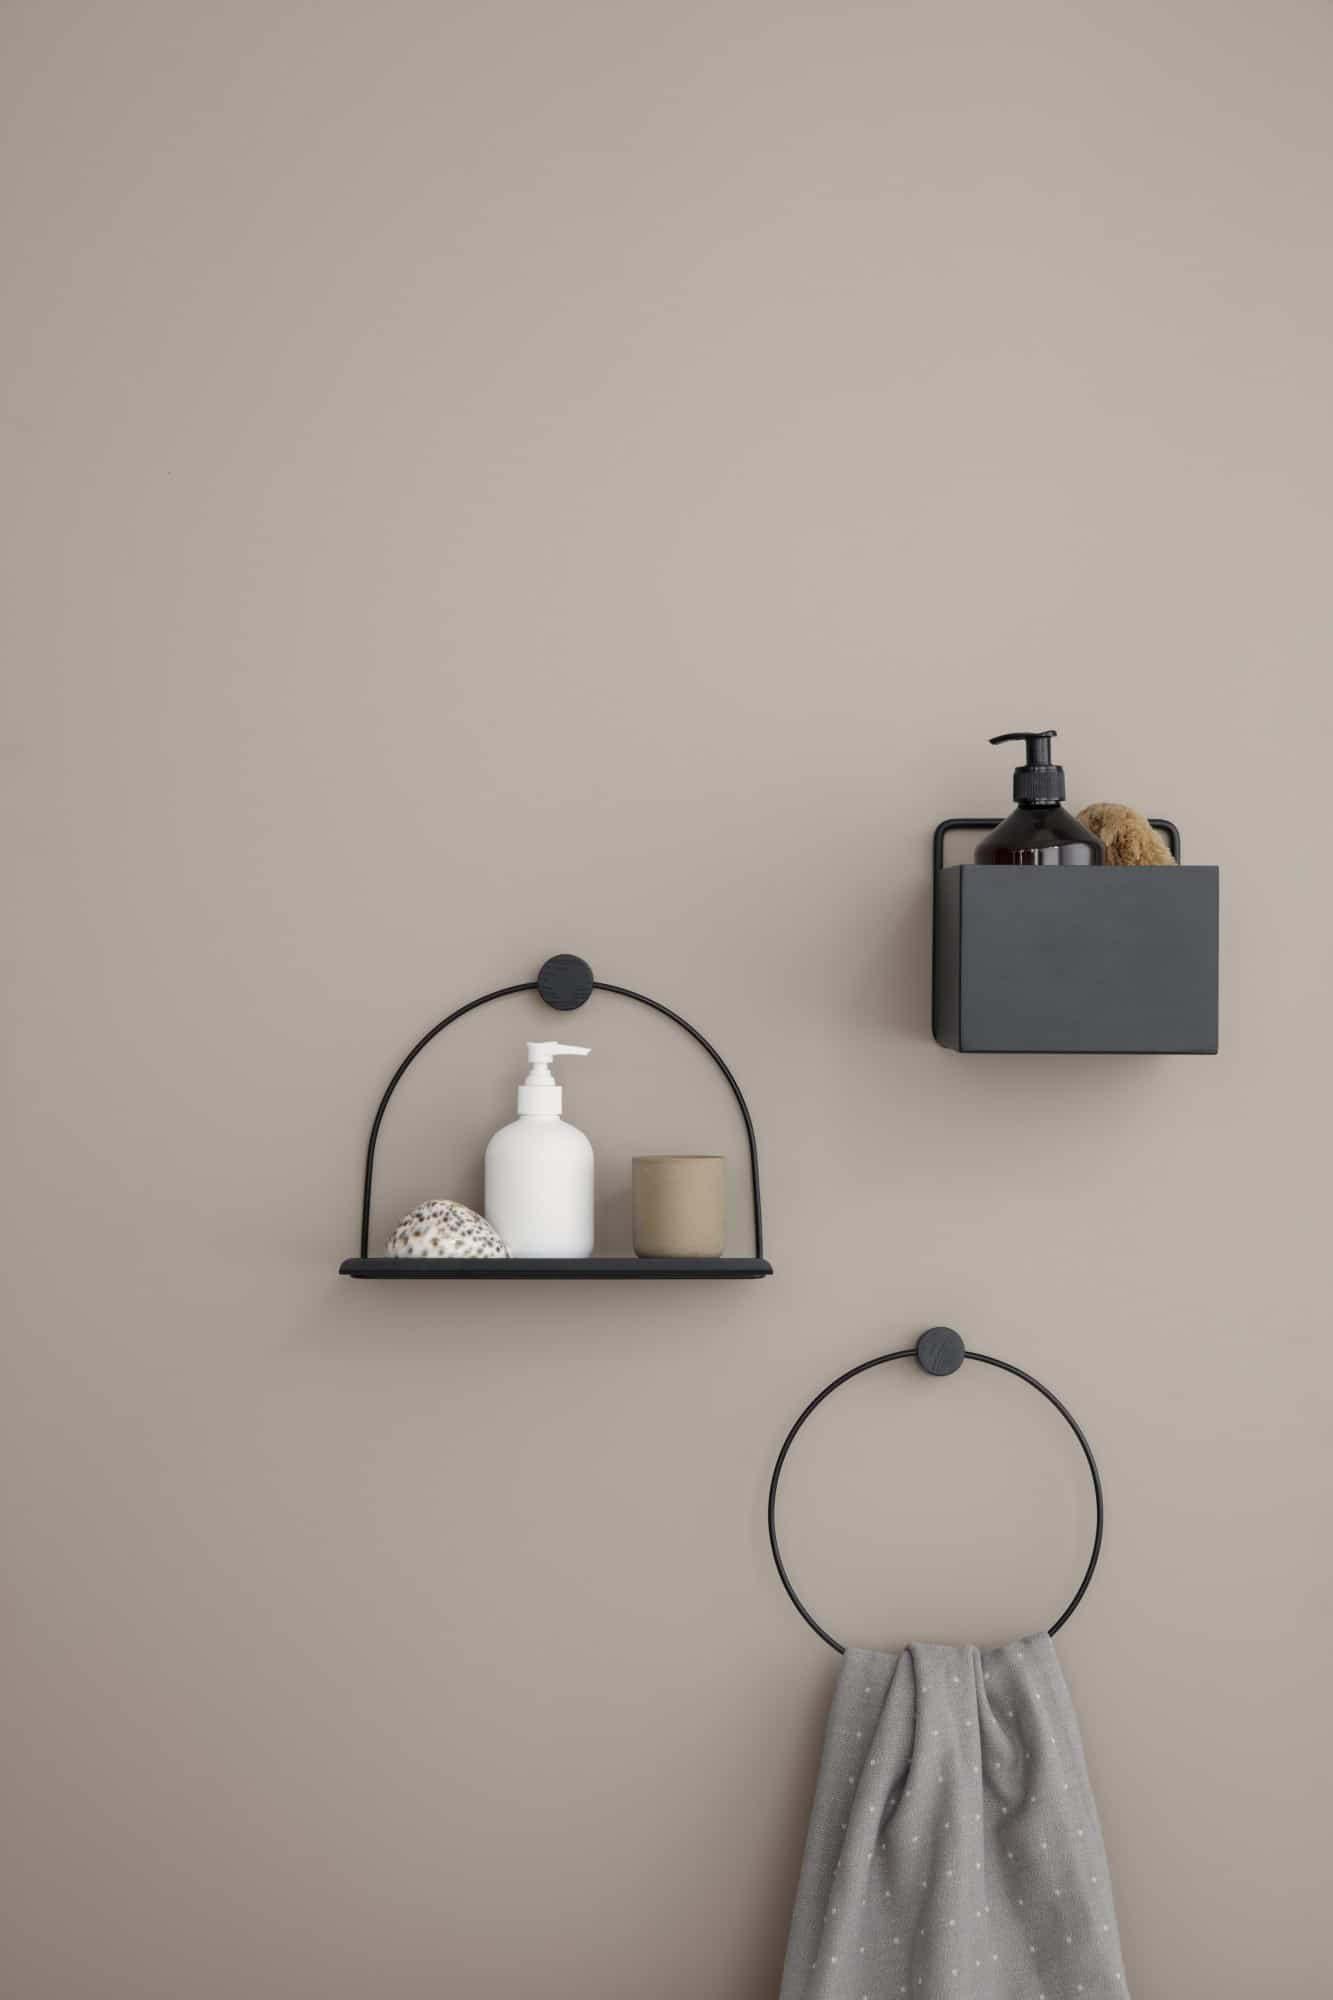 Wall Box, Bathroom Shelf and Towel Hanger from Ferm Living SS 2018 Collection